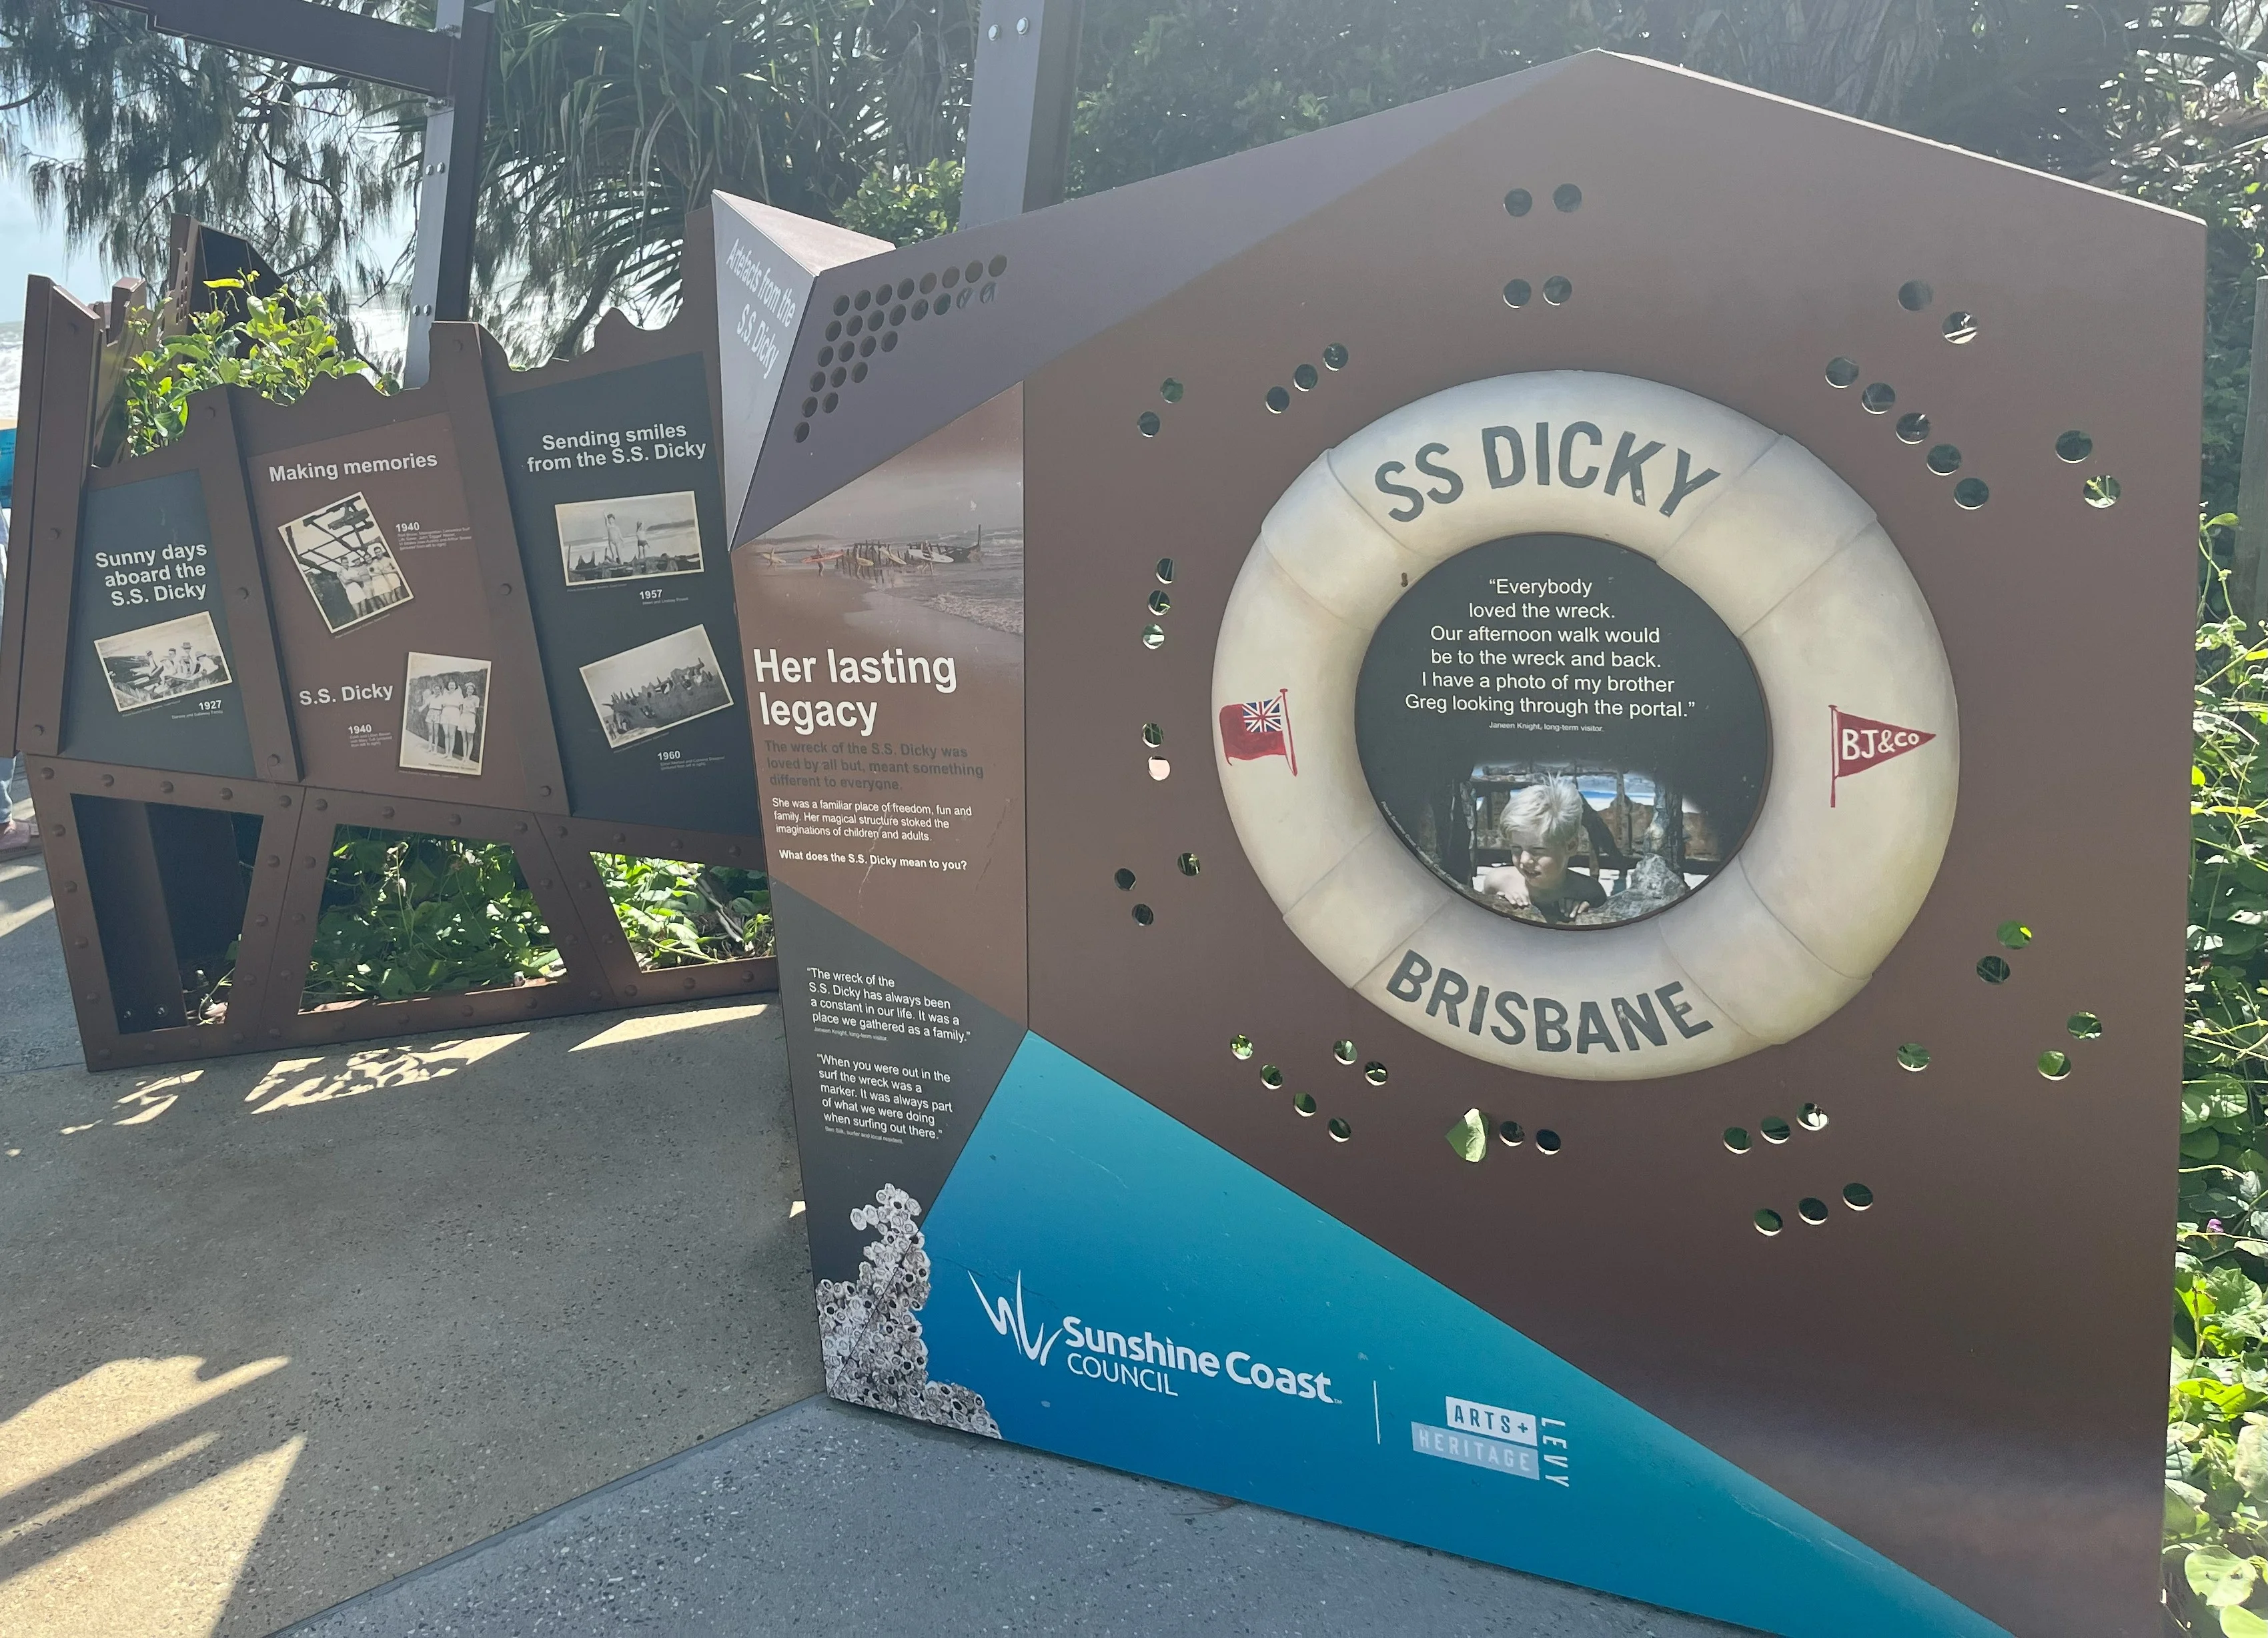 Interpretive signage of the S.S. Dicky at Dicky Beach